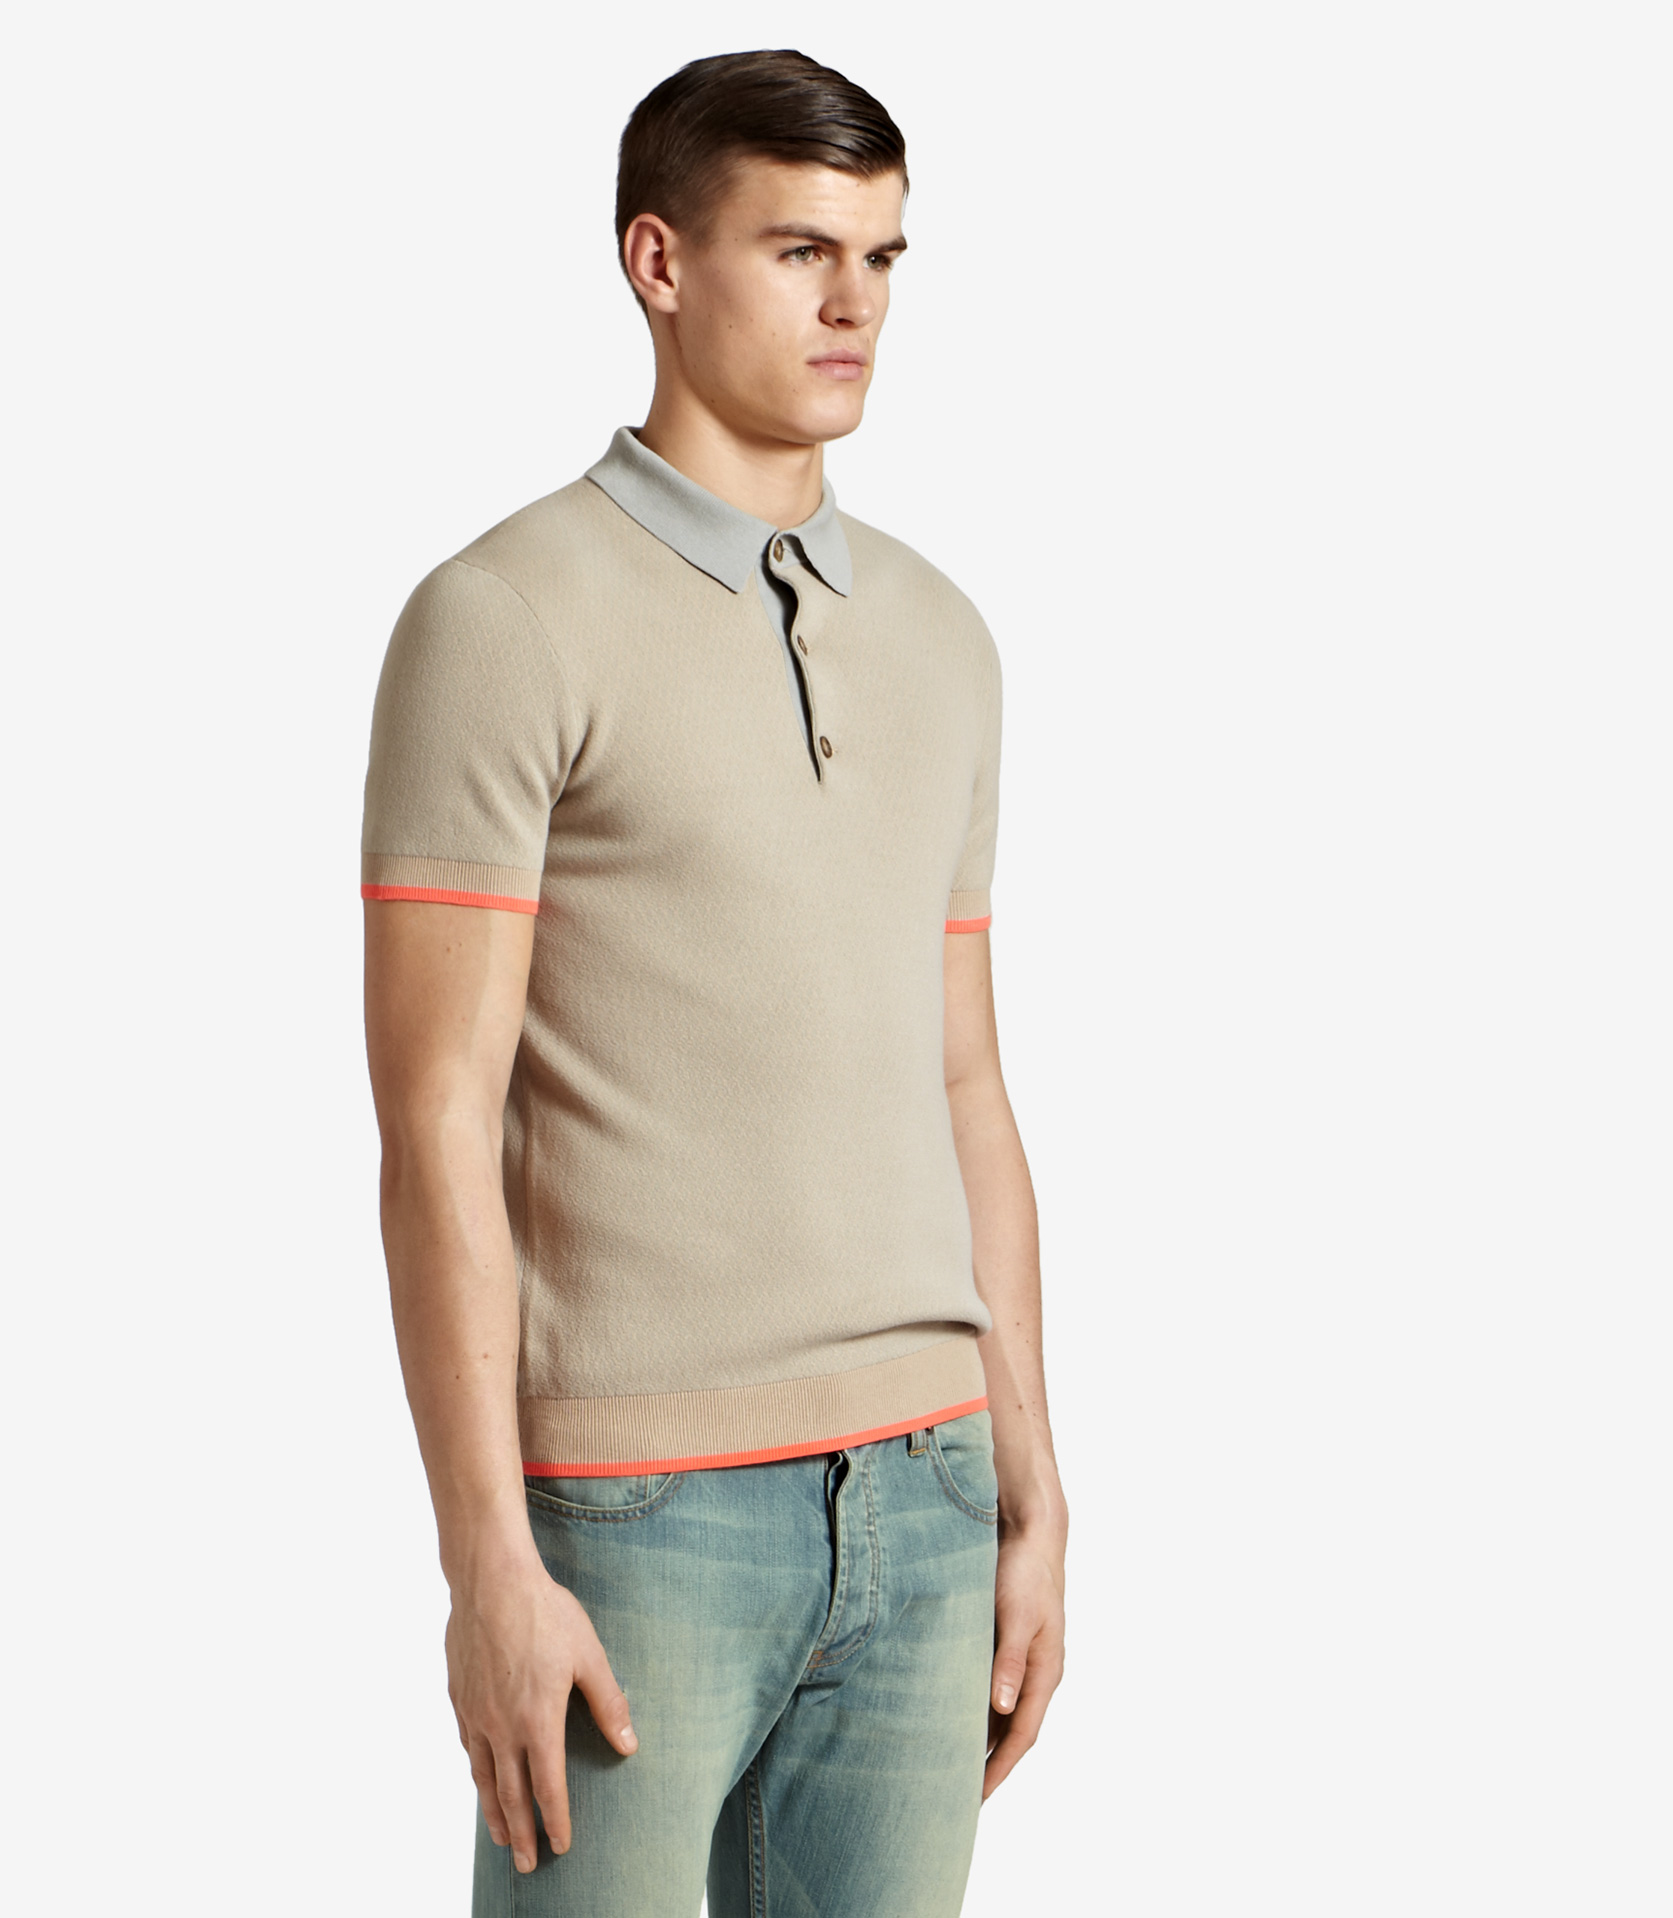 Reiss Wiley Short Sleeve Polo with Contrast Tipping in Natural for Men